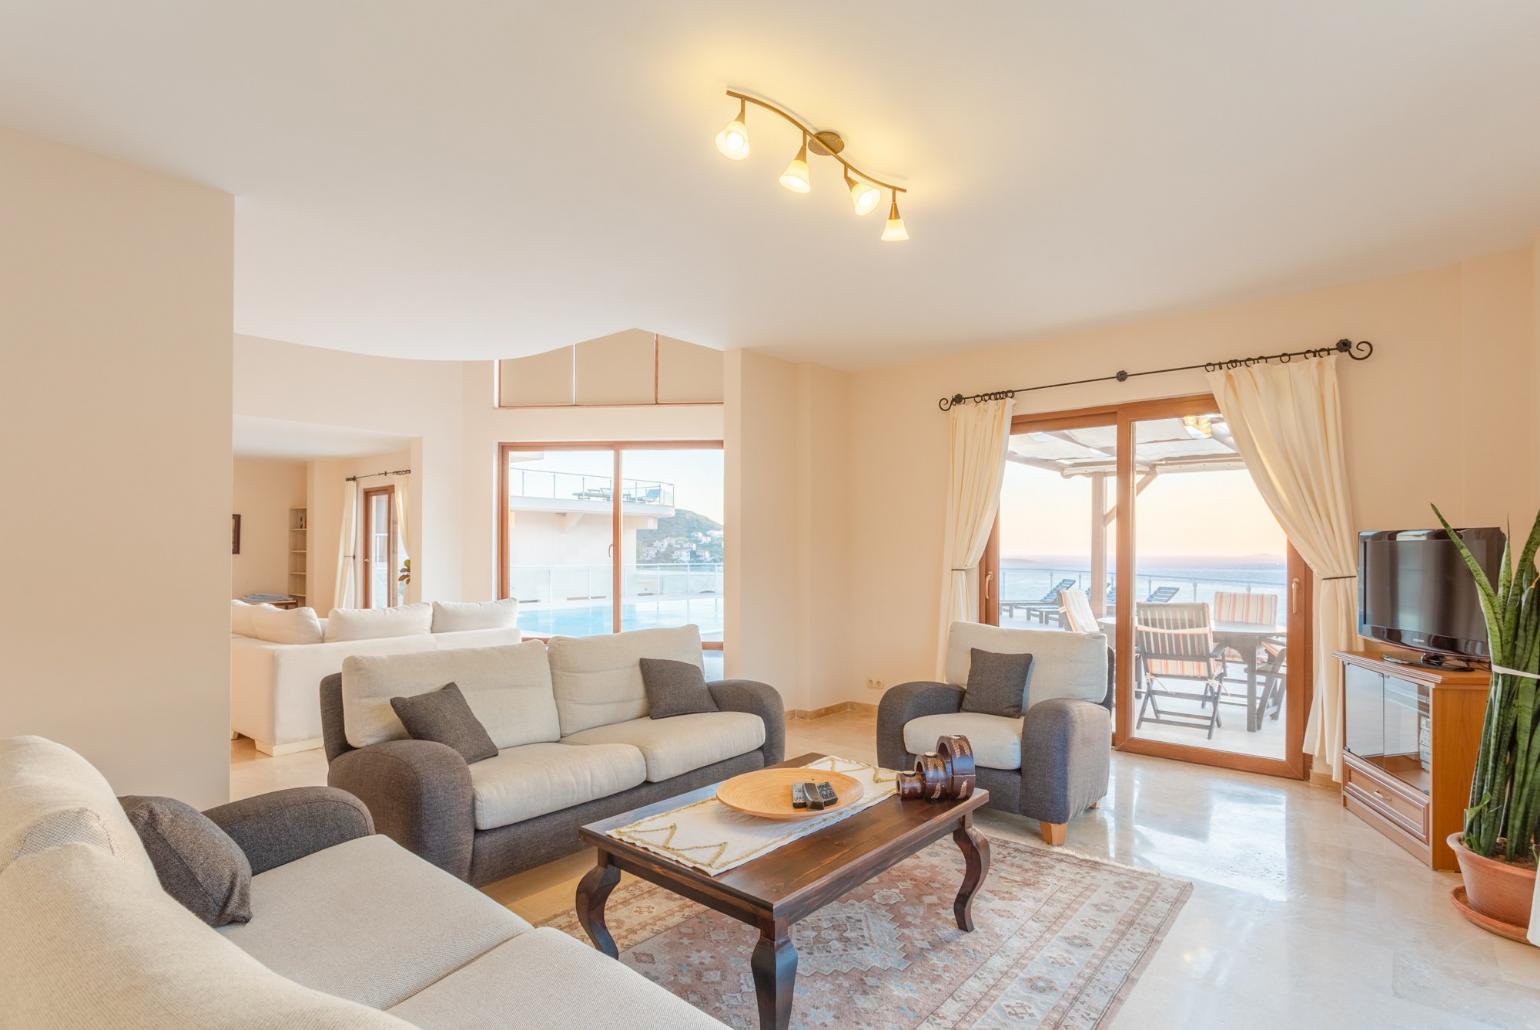 Open-plan living room with sofas, dining area, kitchen, A/C, WiFi internet, satellite TV, DVD player, and terrace access with panoramic sea views